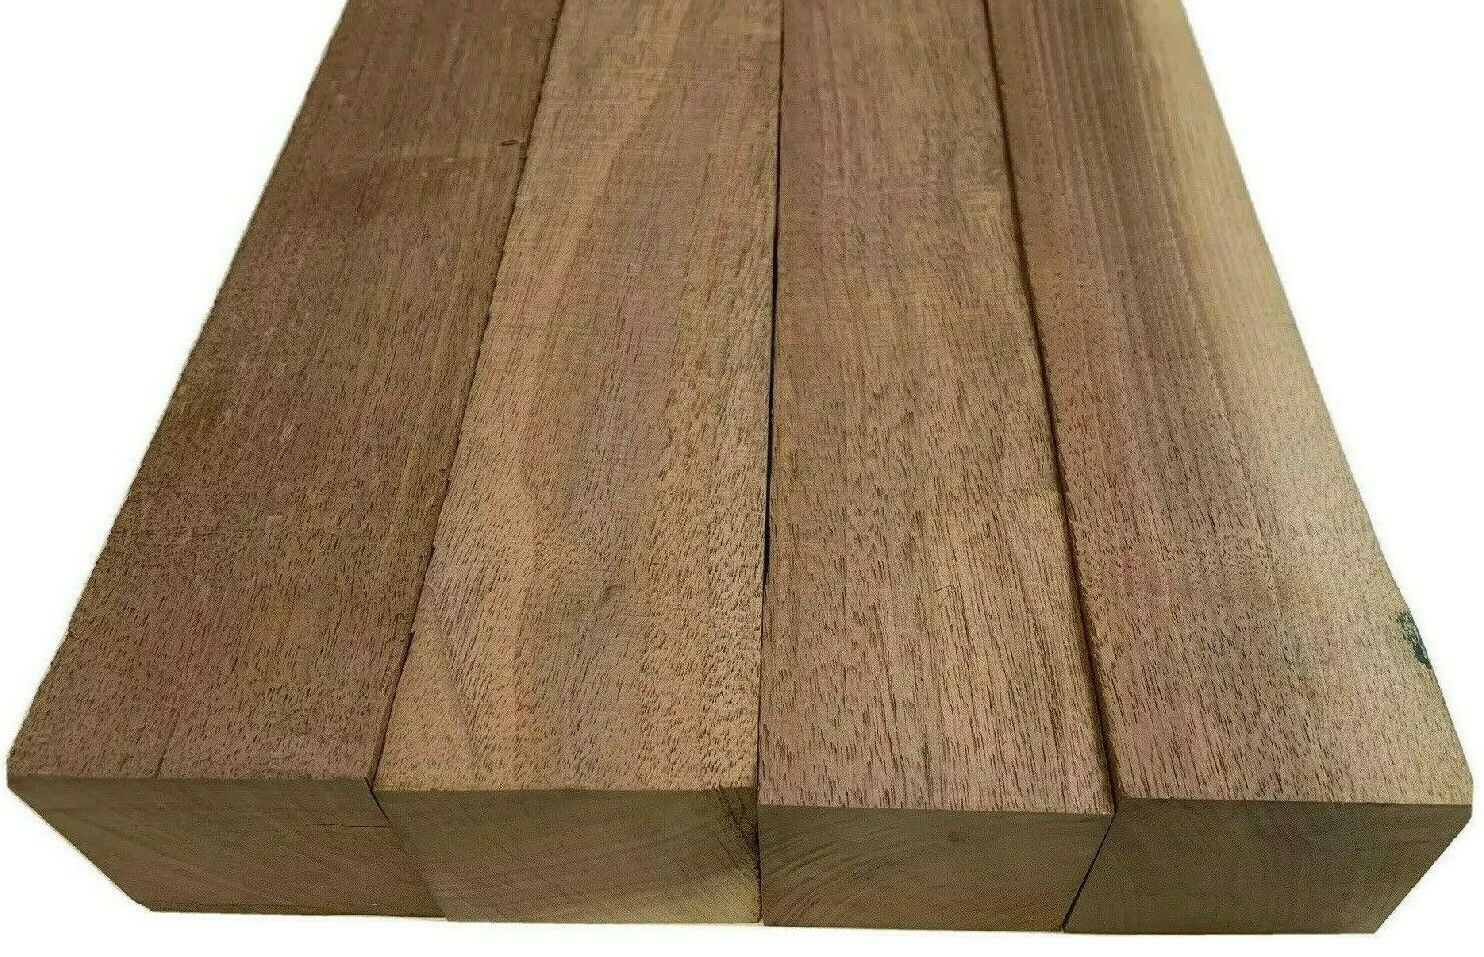 Pack of 4, Black Walnut Lumber Board, Turning Wood of Size 2&quot; X 2&quot; X 6&quot; - Exotic Wood Zone 